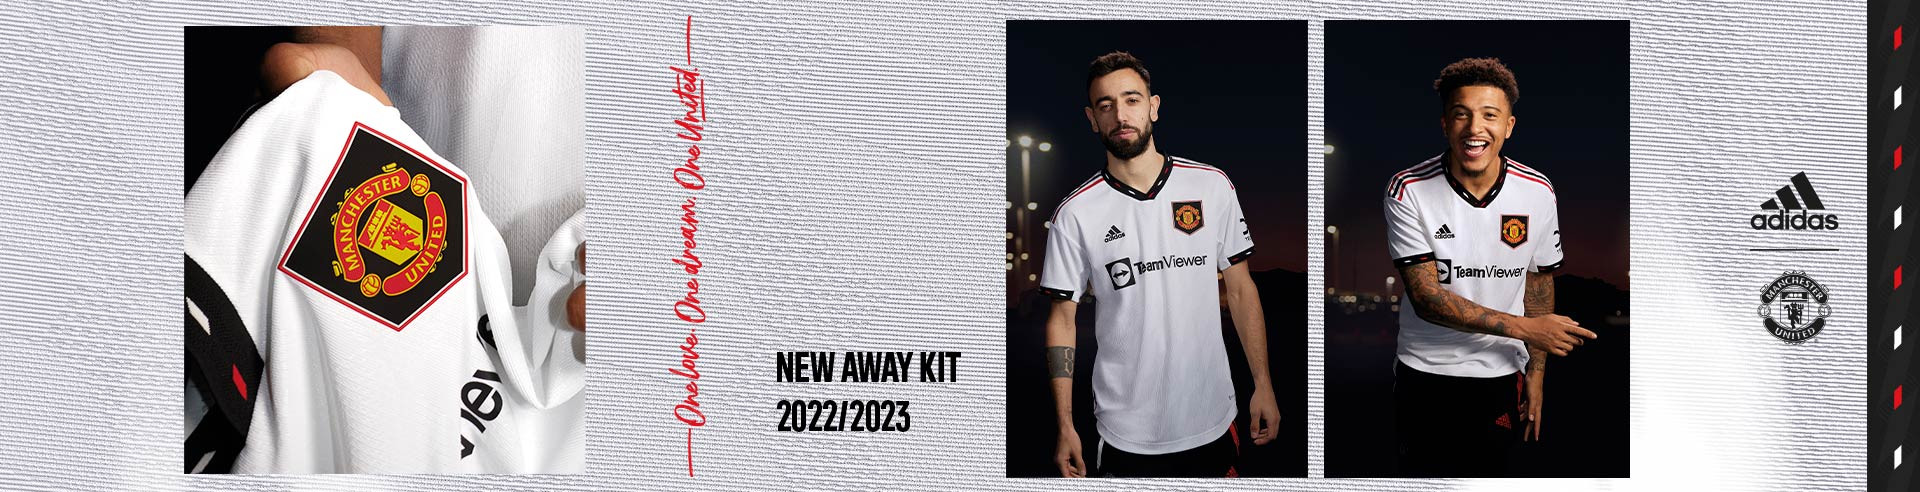 MANCHESTER UNITED NEW AWAY KIT 2022 2023 INT